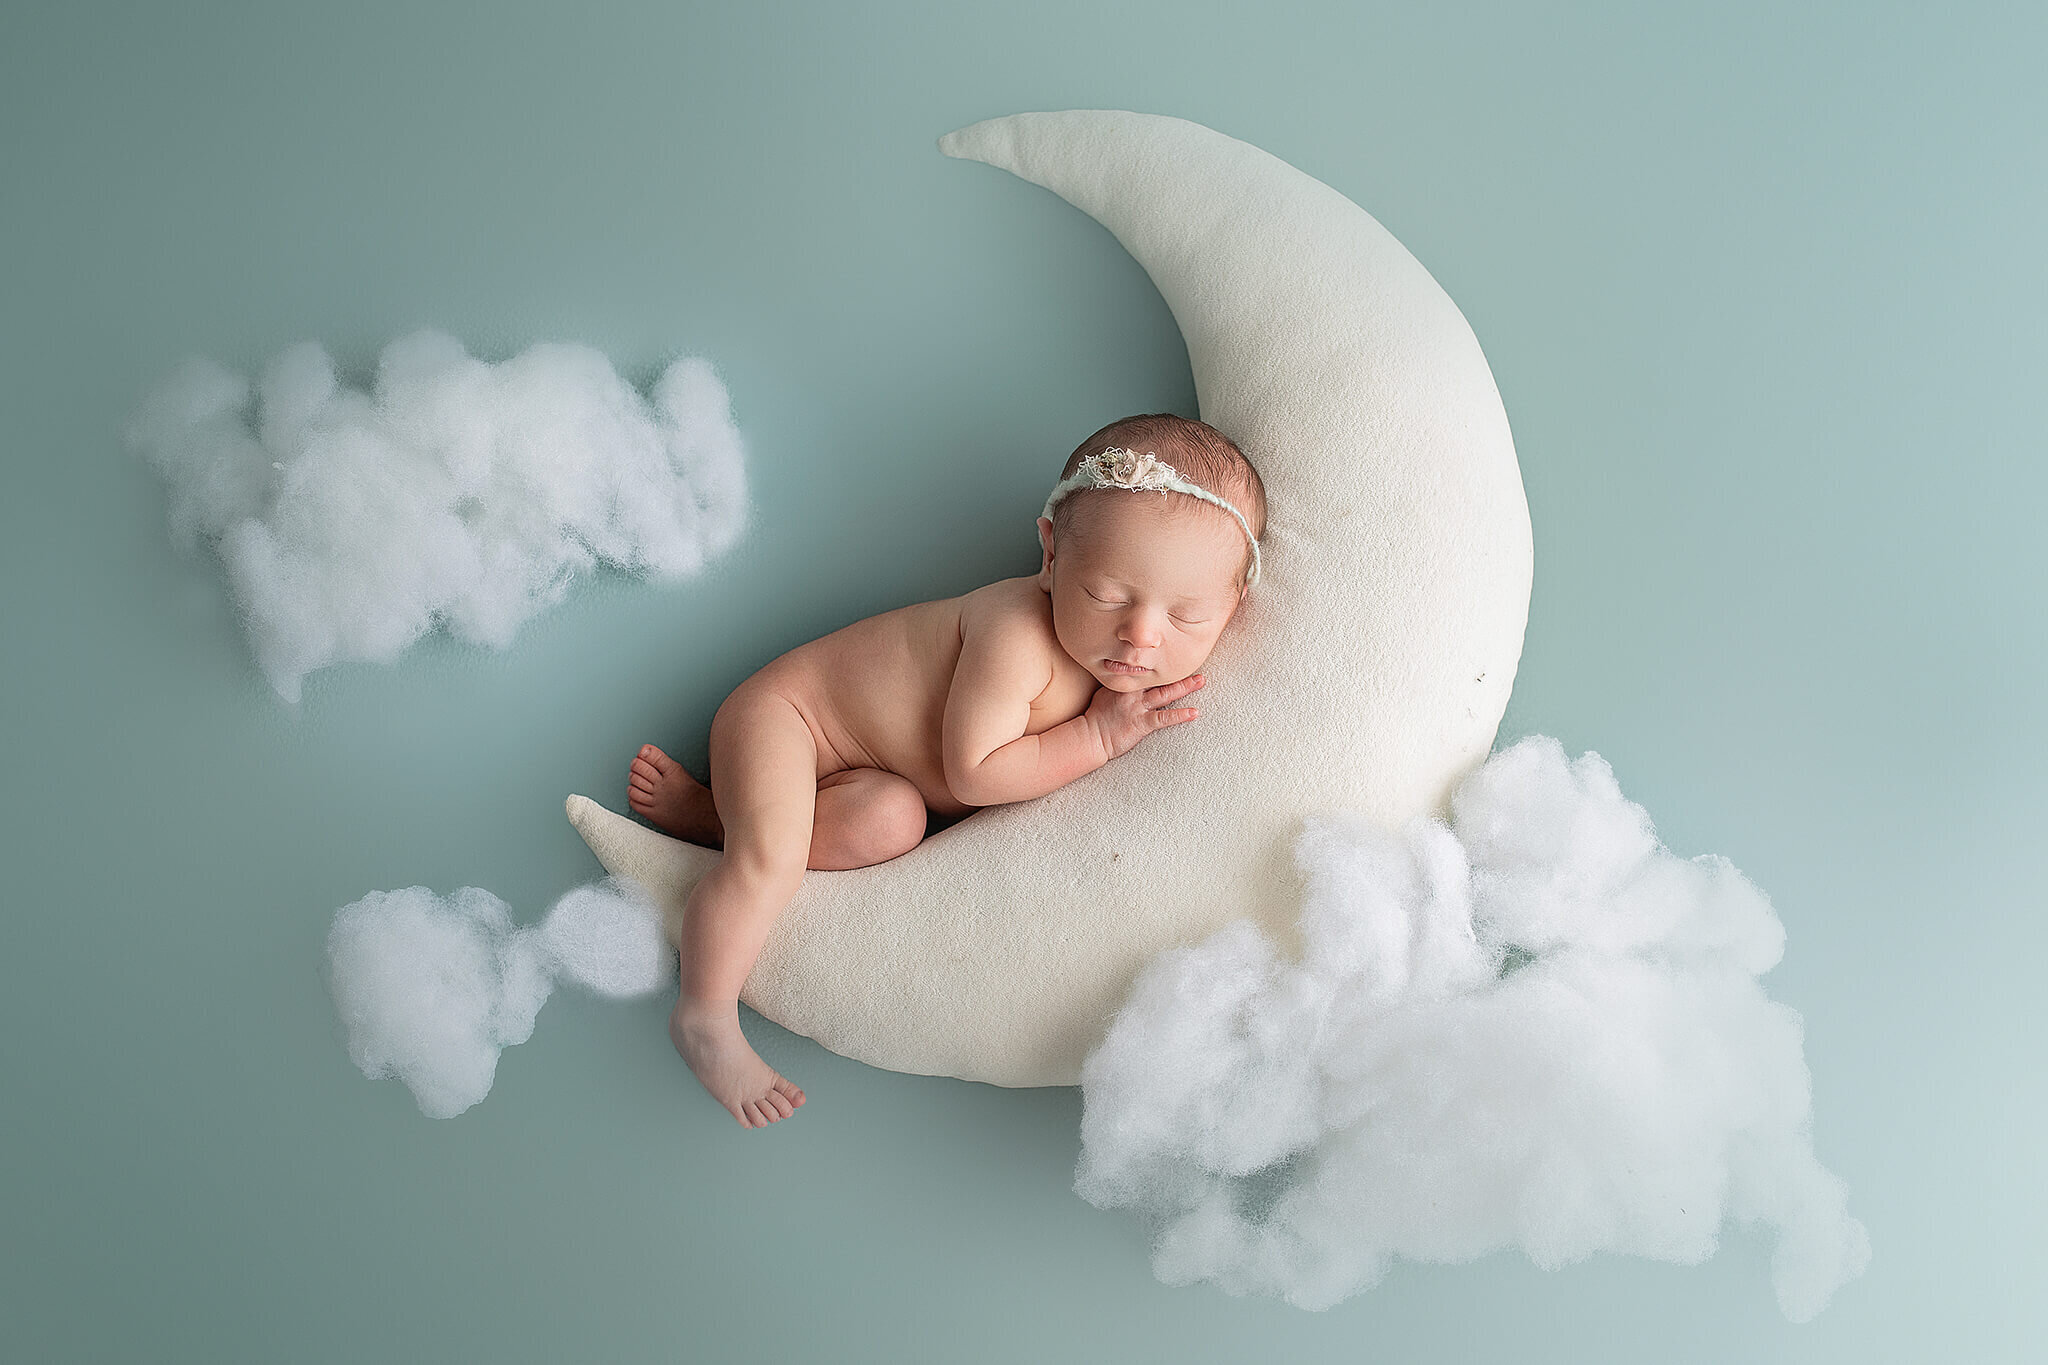 newborn baby girl snuggled on stuffed moon wtith clouds around  baby and moon